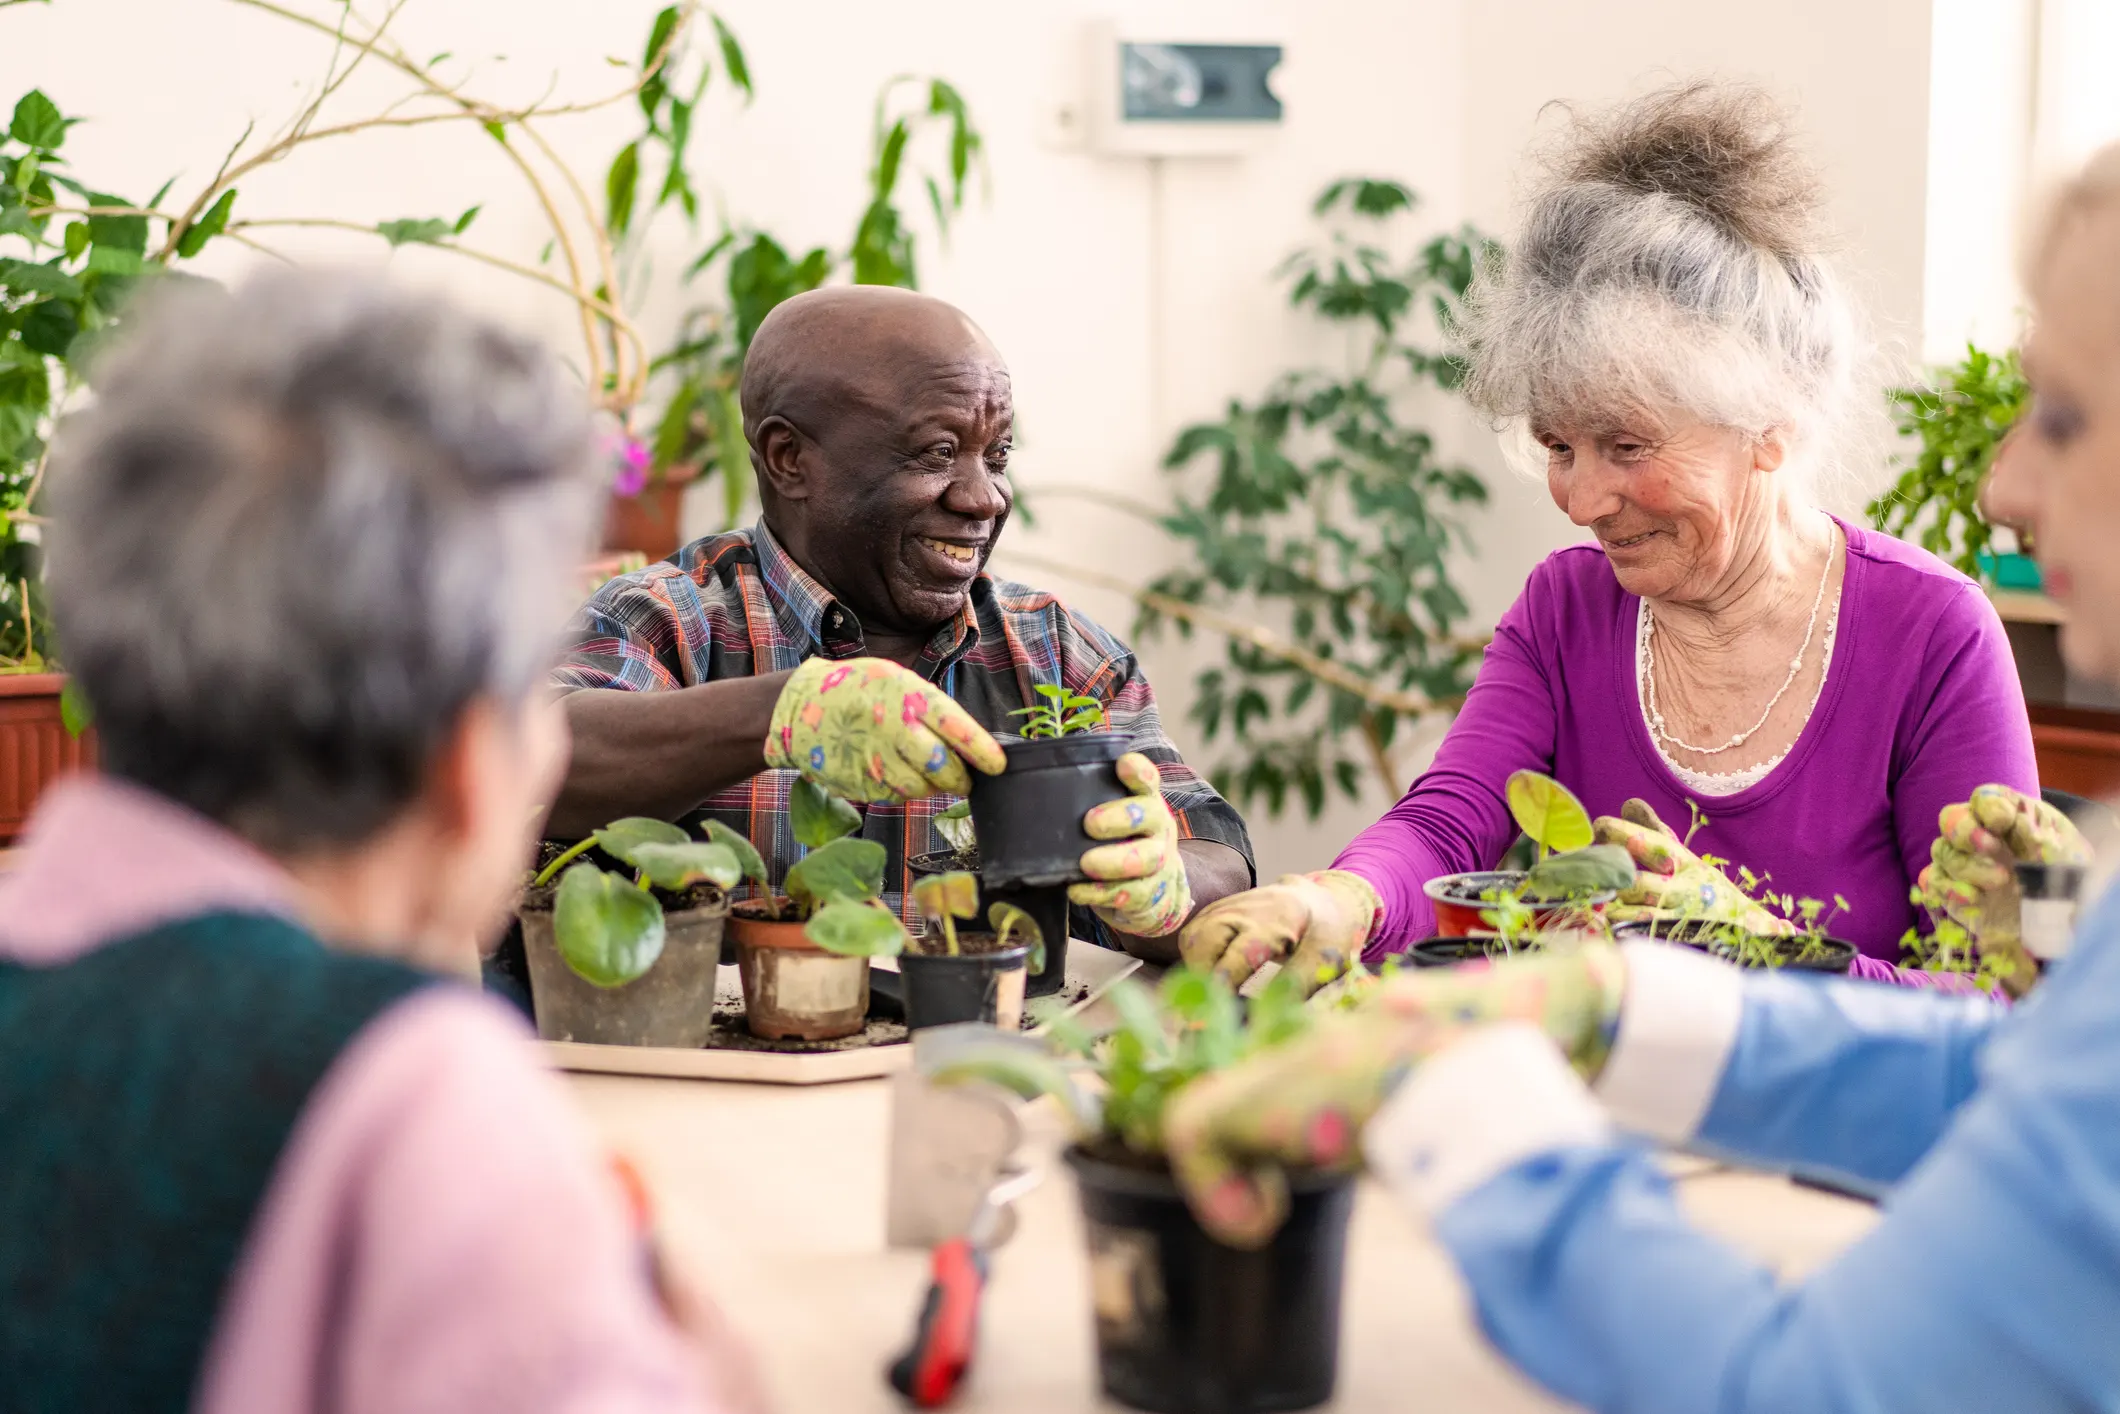 Assisted Living Communities in New York, New Jersey and Connecticut